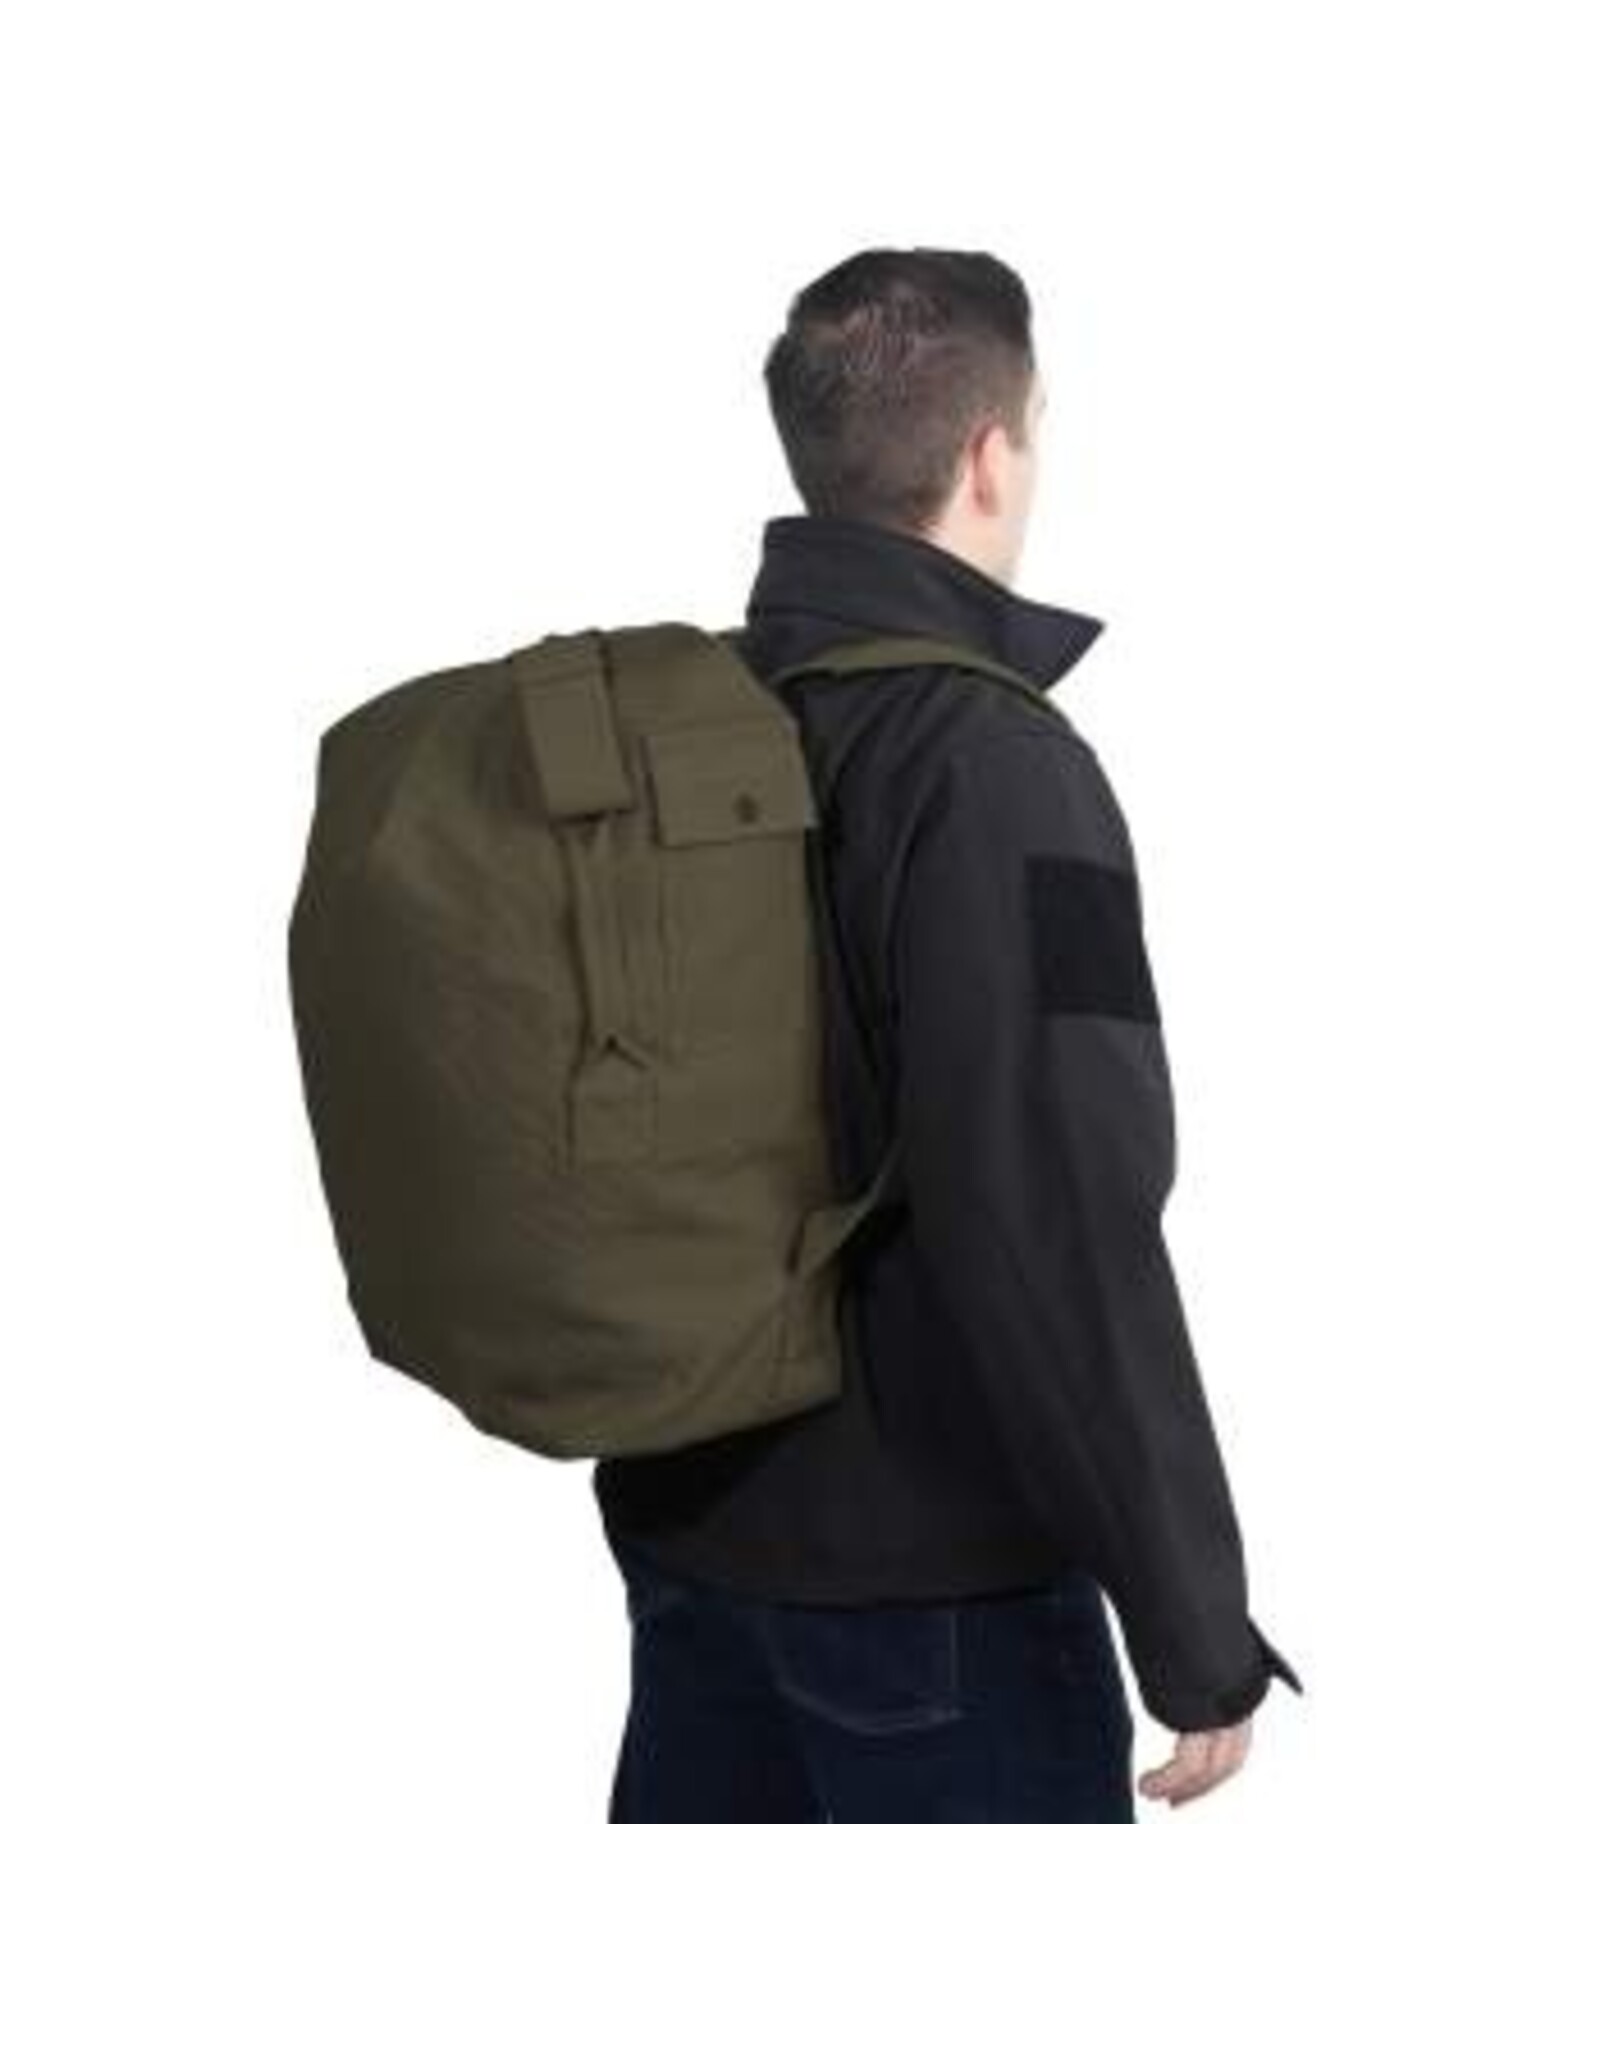 ROTHCO NOMAD CANVAS DUFFLE BACKPACK